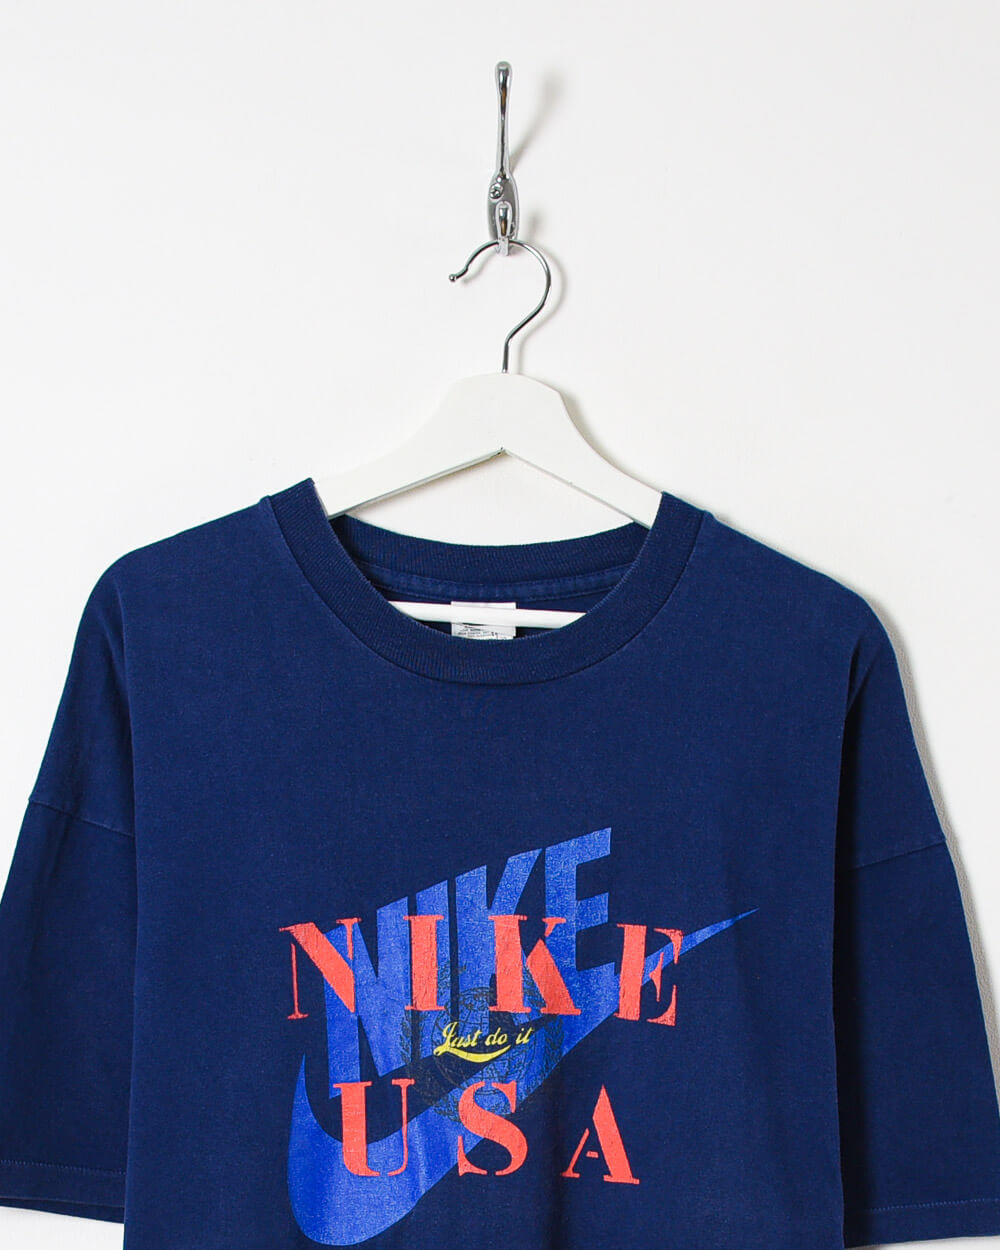 Navy Nike USA Just Do It T-Shirt - X-Large